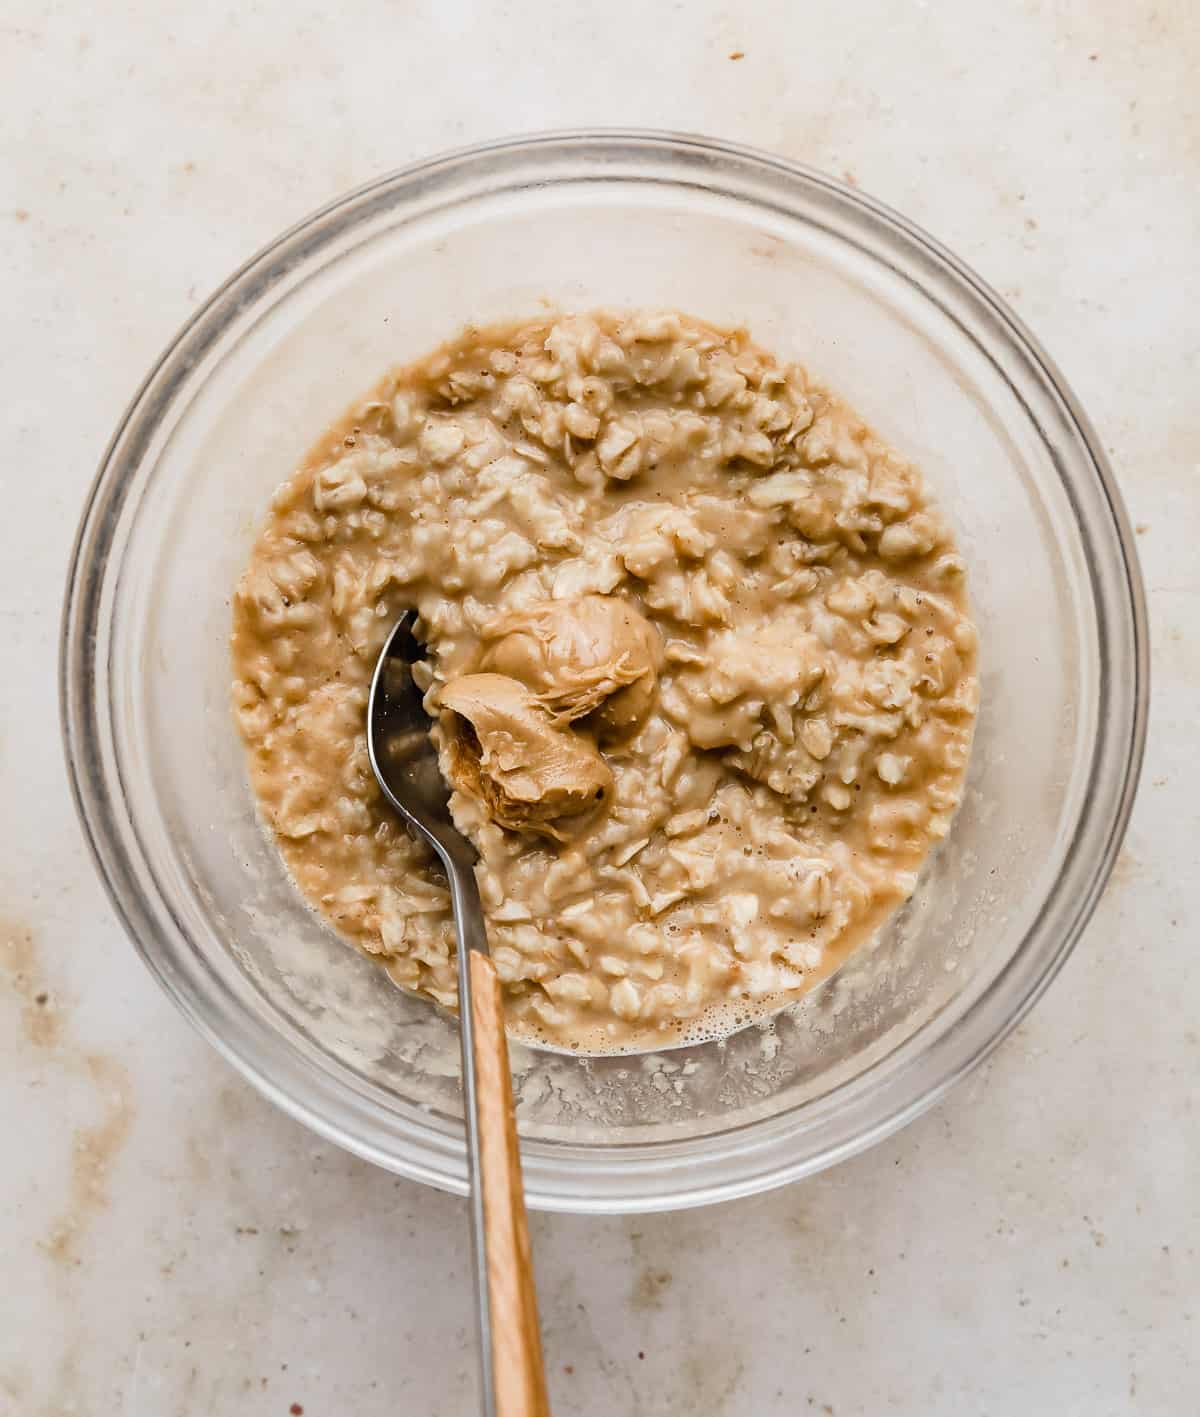 Tan colored oatmeal with a dollop of creamy peanut butter on top.